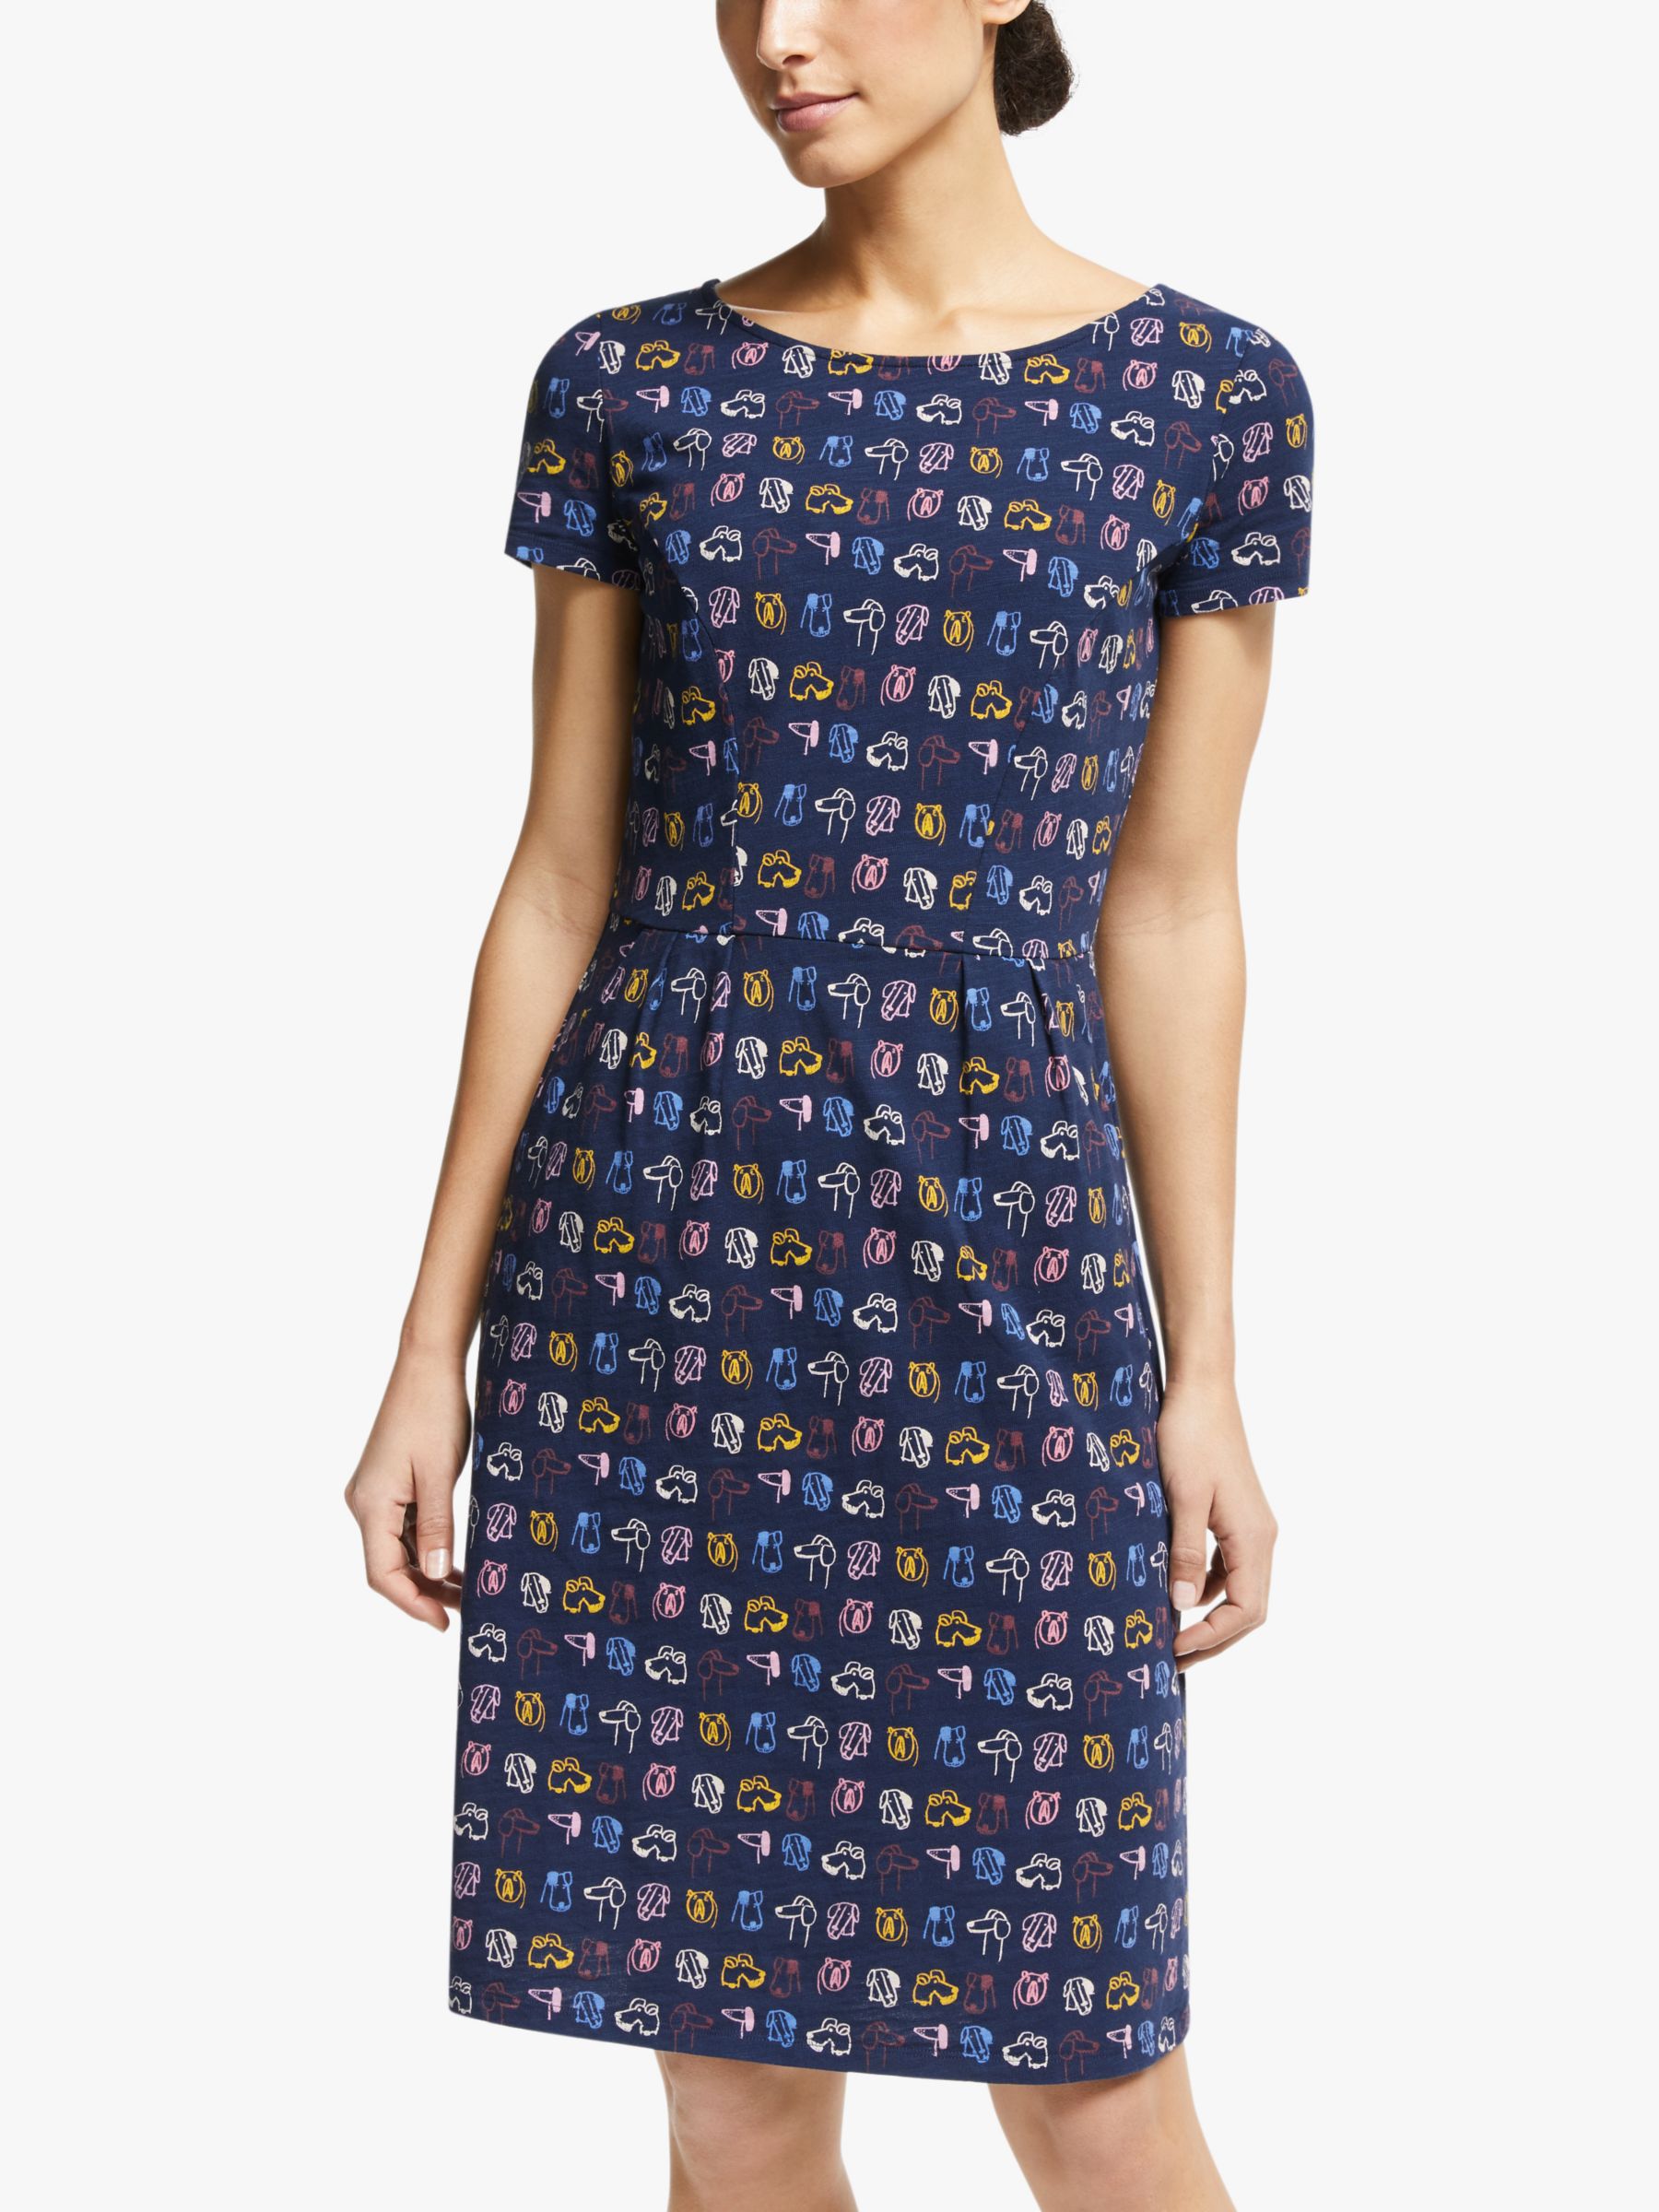 Boden Phoebe Cotton Dog Print Jersey Dress, French Navy/Rufus